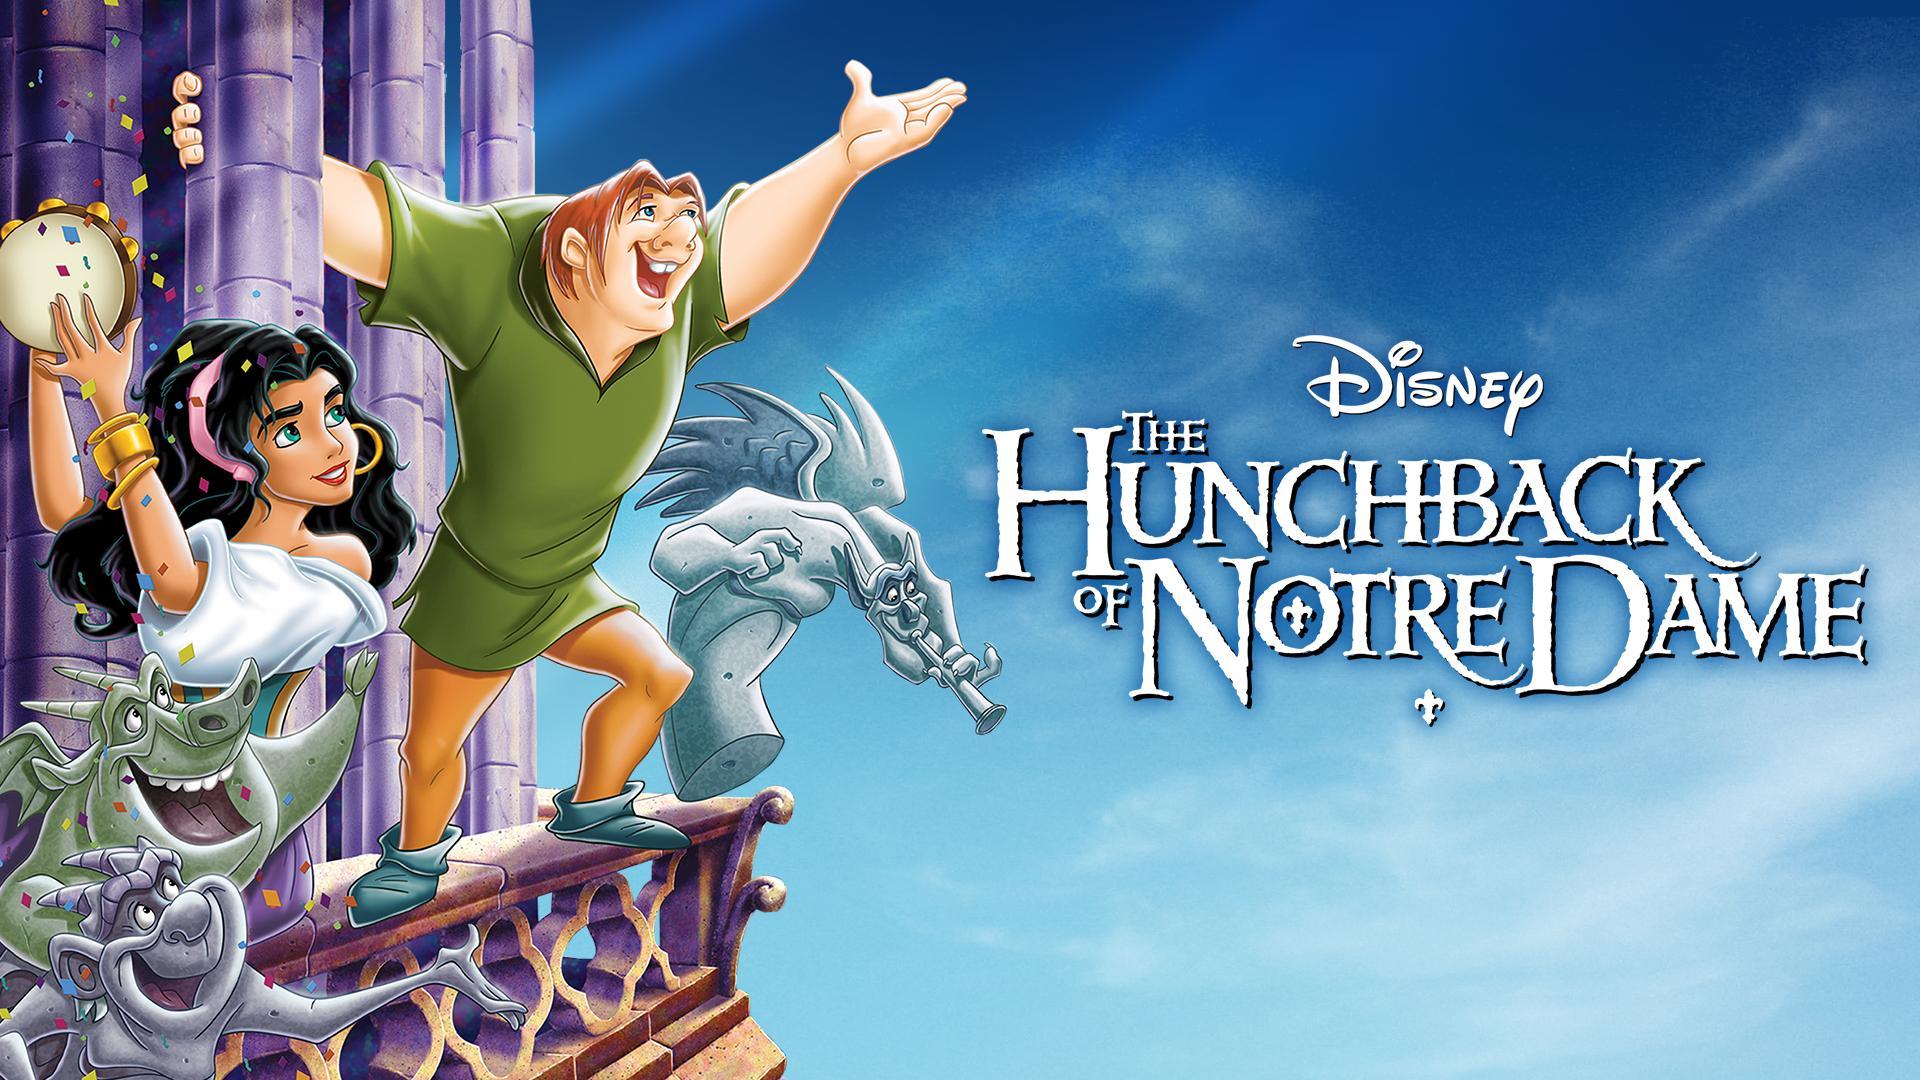 The Hunchback of Notre Dame Wallpapers - Top Free The Hunchback of